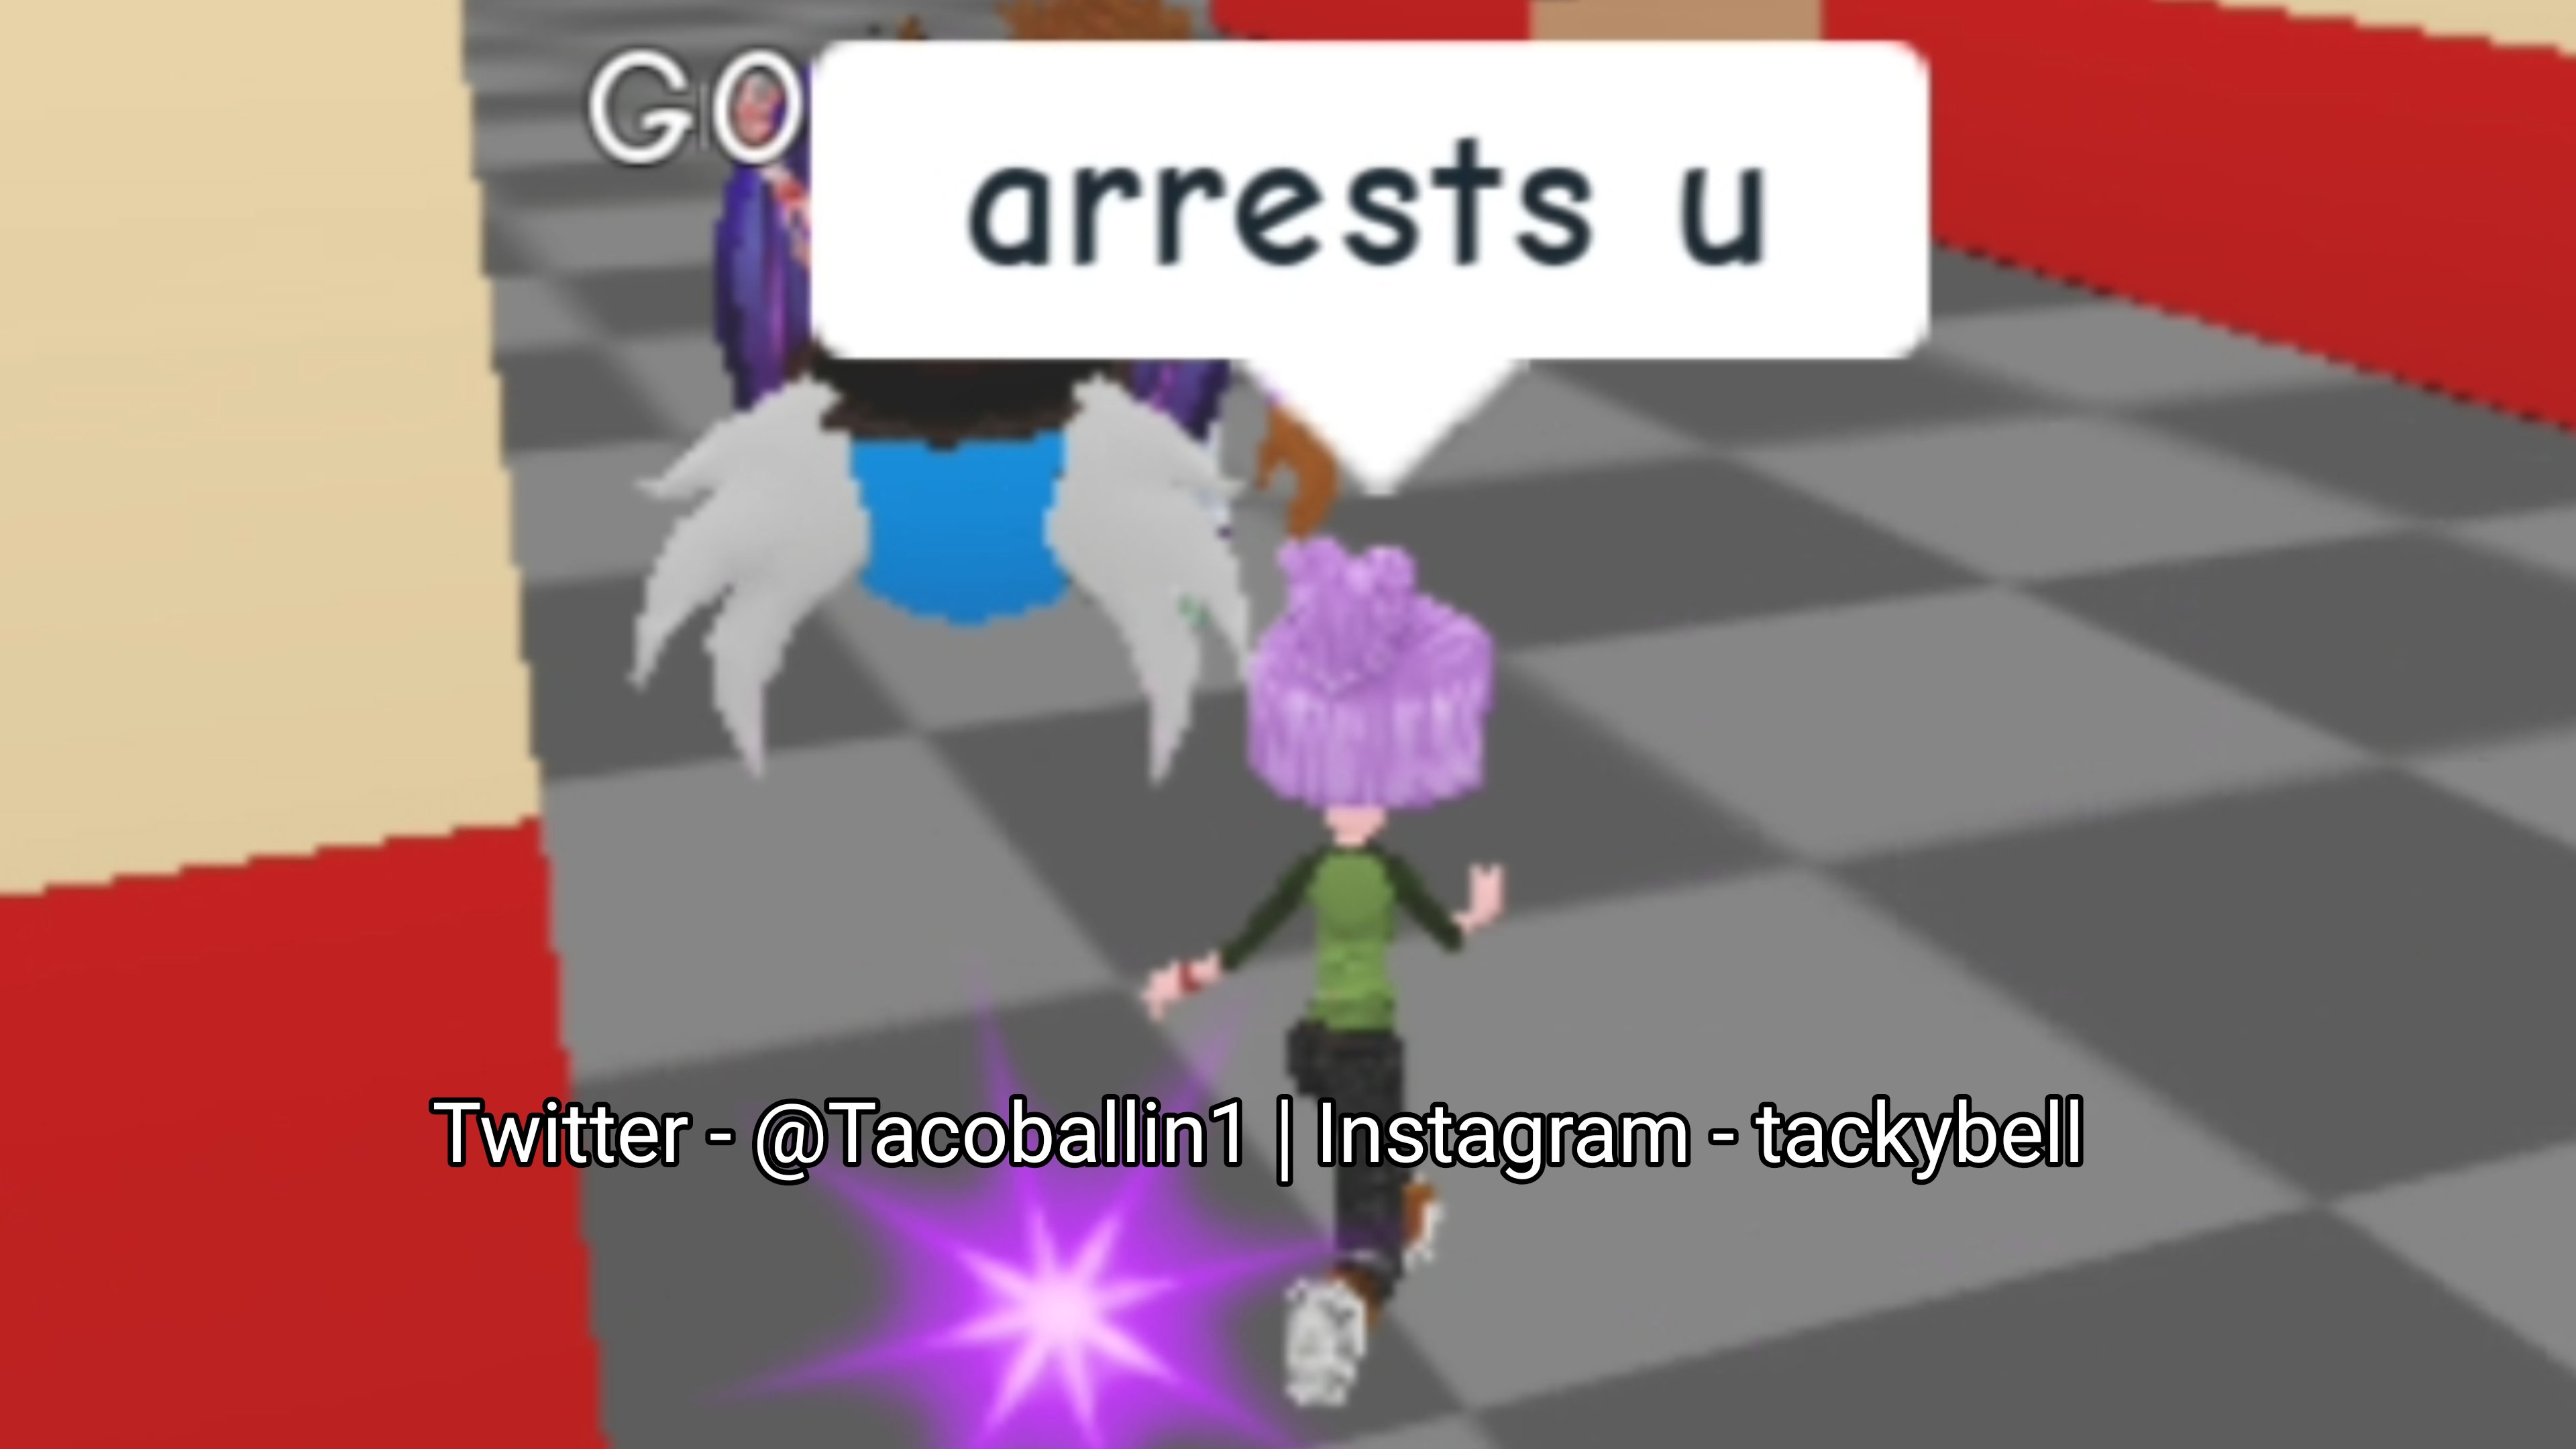 ROBLOX MEMES on X: TO WATCH THE FULL VIDEO CLICK THE LINK IN MY